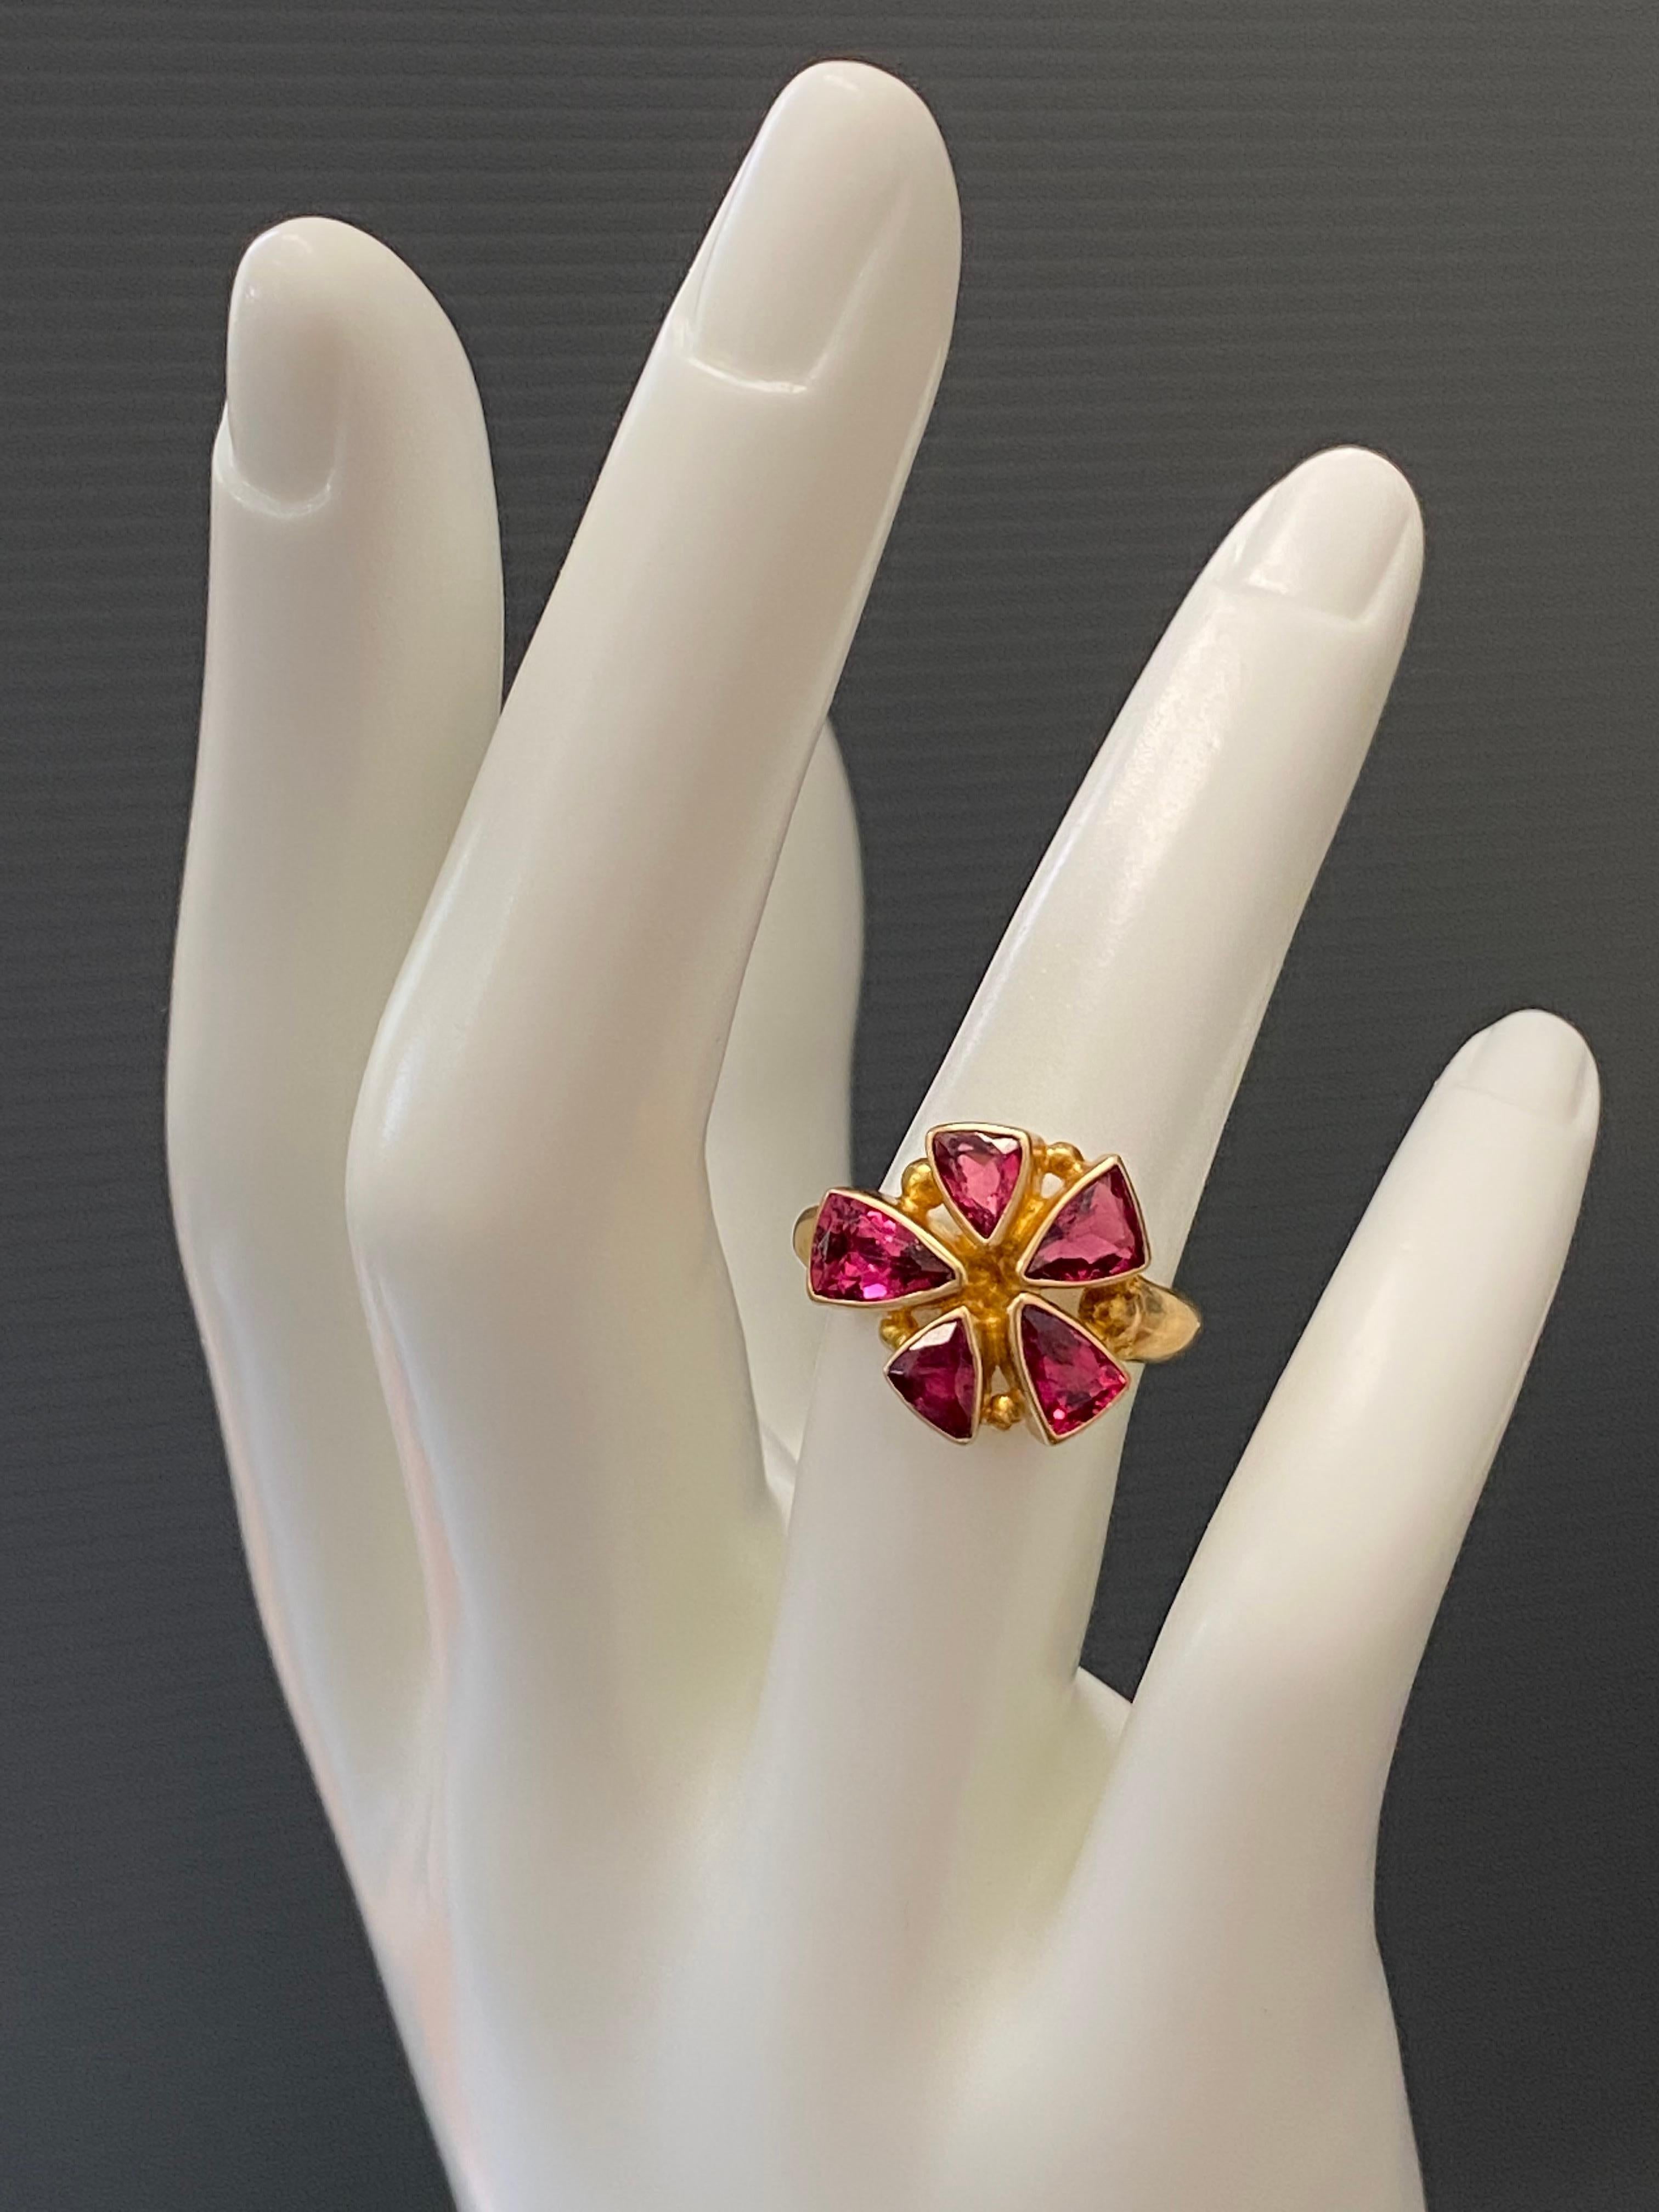 Lovely handcrafted Steven Battelle 2.5 carat multi-stone Pink Tourmaline ring in 18K Gold.
Pretty pink. This hot pink tourmaline is a must add to your collection.
Stones sizes approximately 4x6mm to 5x7mm trillium.
Ring size 6.75. Can be resized.


